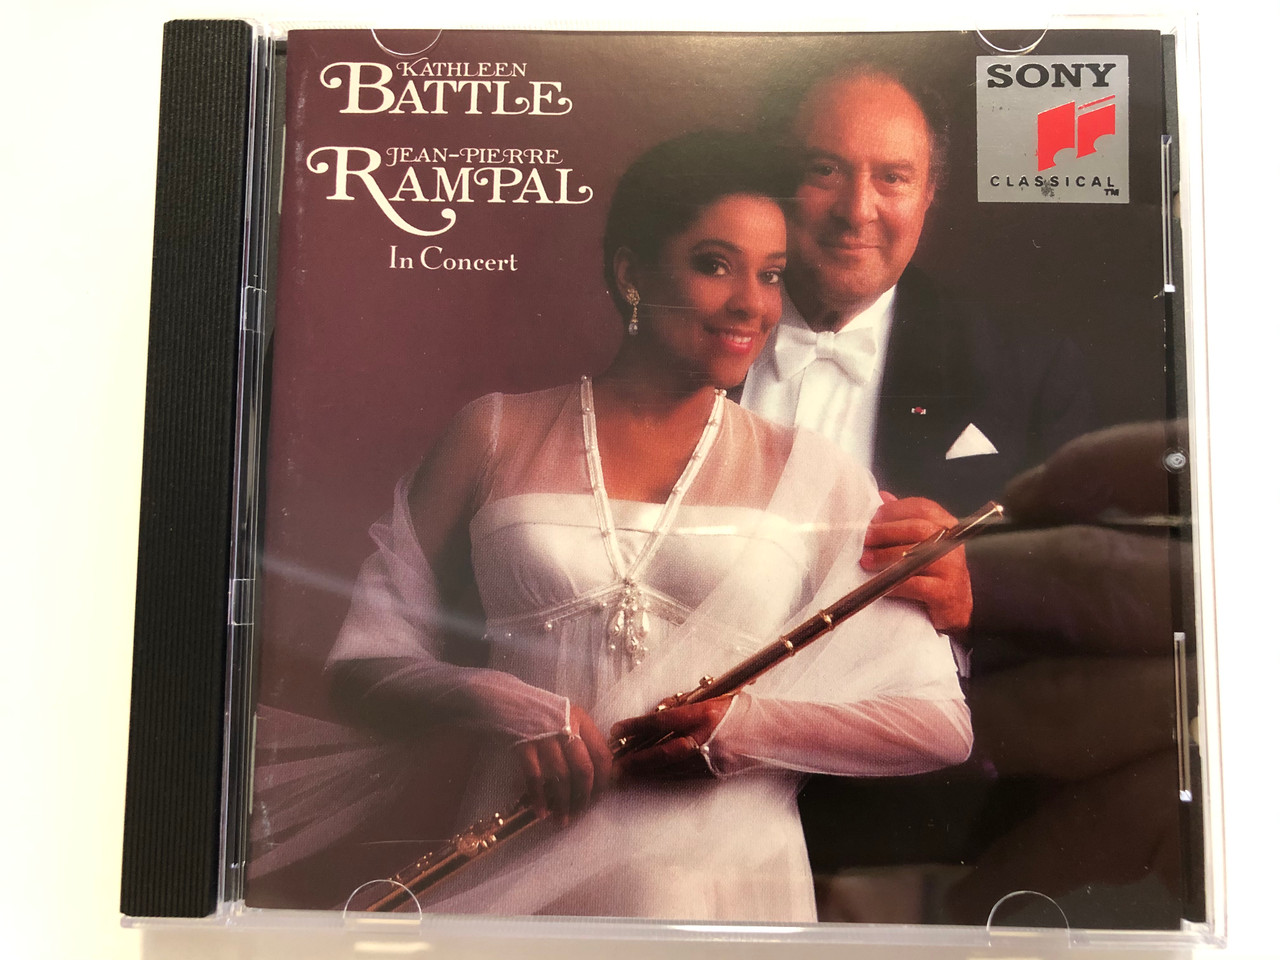 https://cdn10.bigcommerce.com/s-62bdpkt7pb/products/31238/images/183886/Kathleen_Battle_Jean-Pierre_Rampal_In_Concert_Sony_Classical_Audio_CD_1993_SK_53106_1__47884.1625747445.1280.1280.JPG?c=2